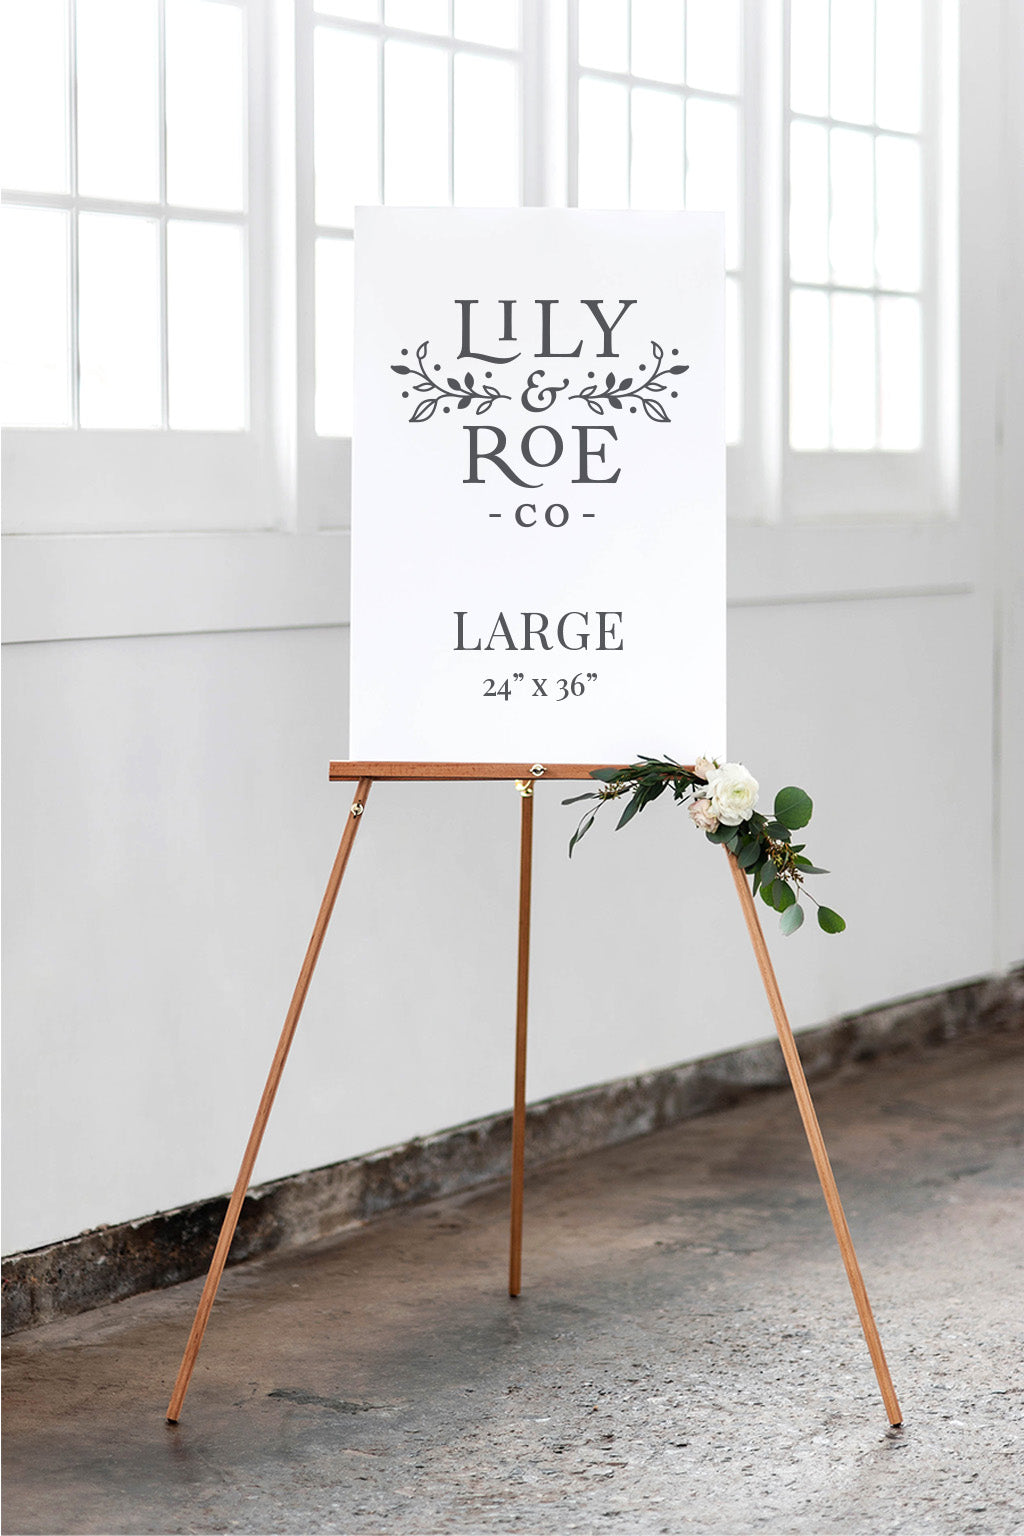 What size wedding sign should I get large lily roe co